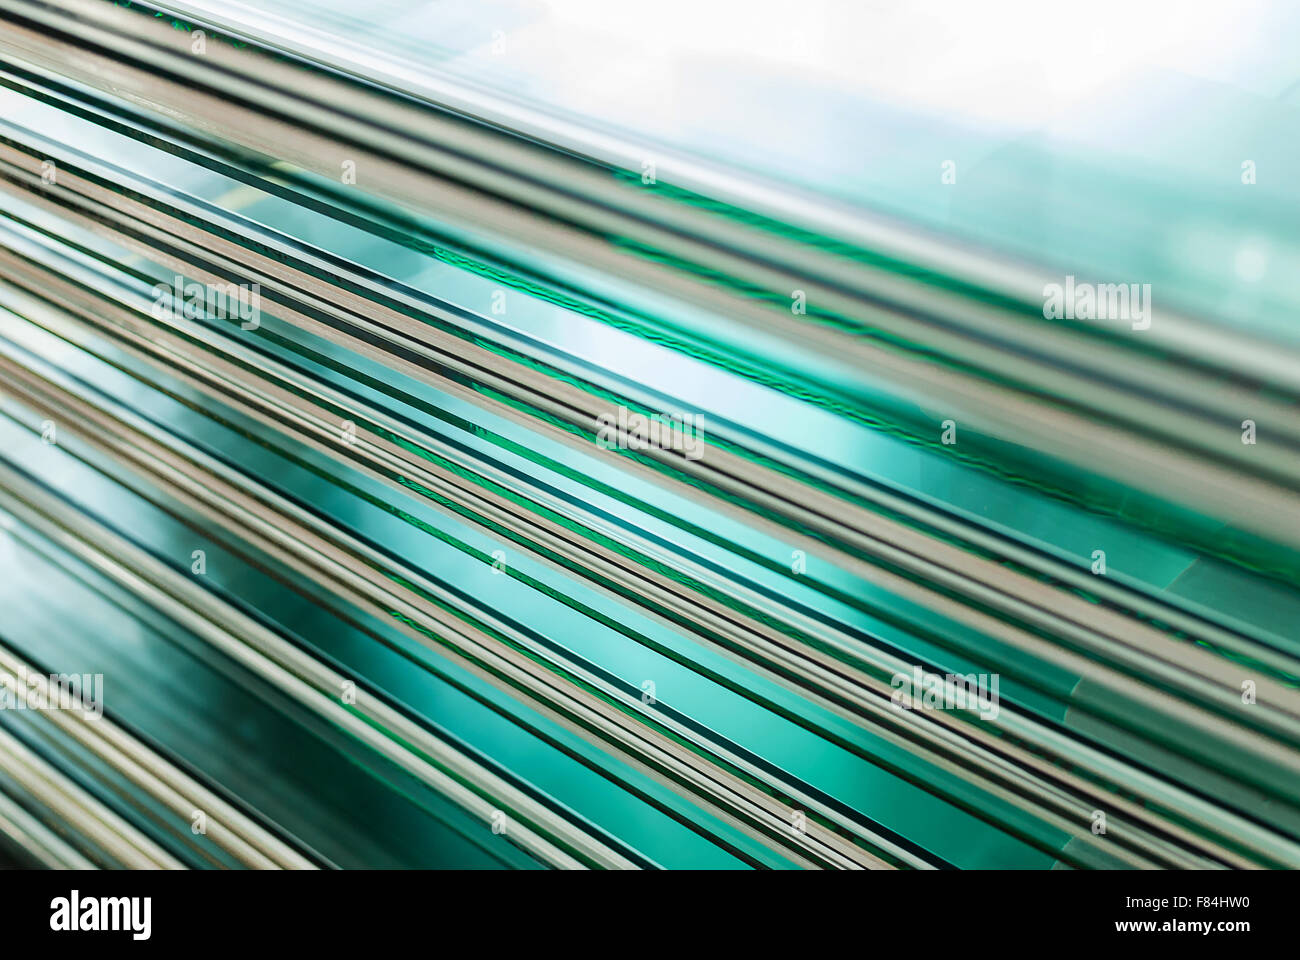 Sheets of Tempered Window Float Glass Stock Photo